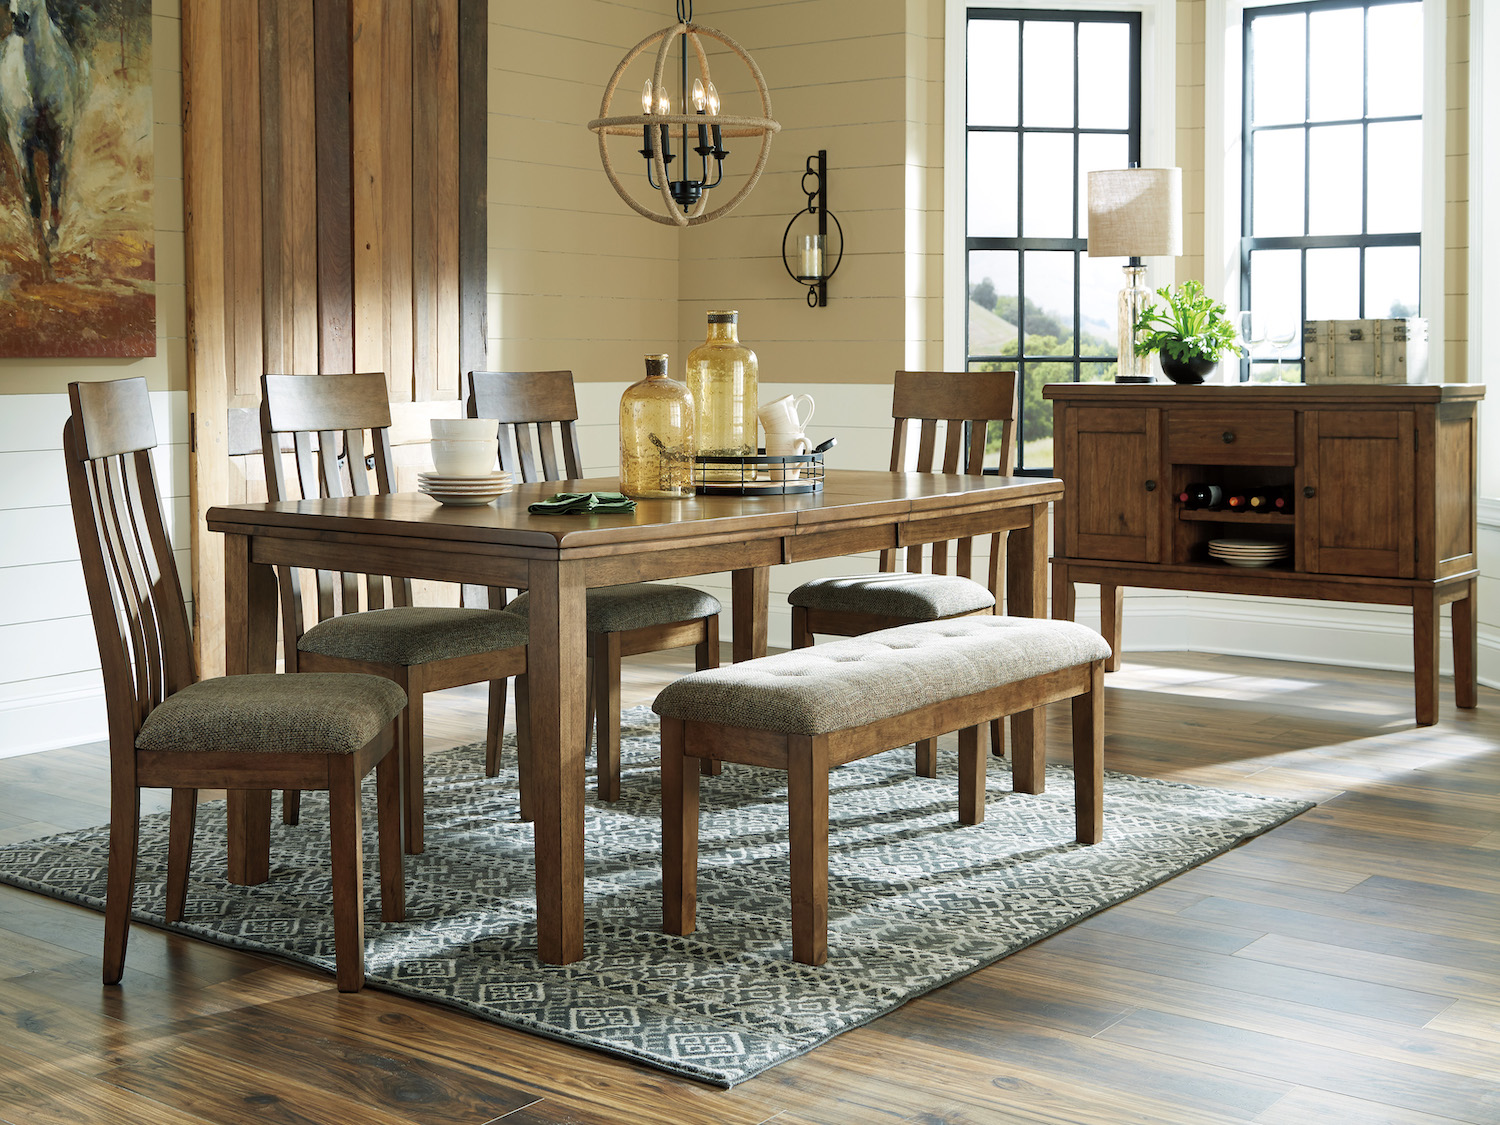 Best Dining Room Tables For Families - Everything Handmade